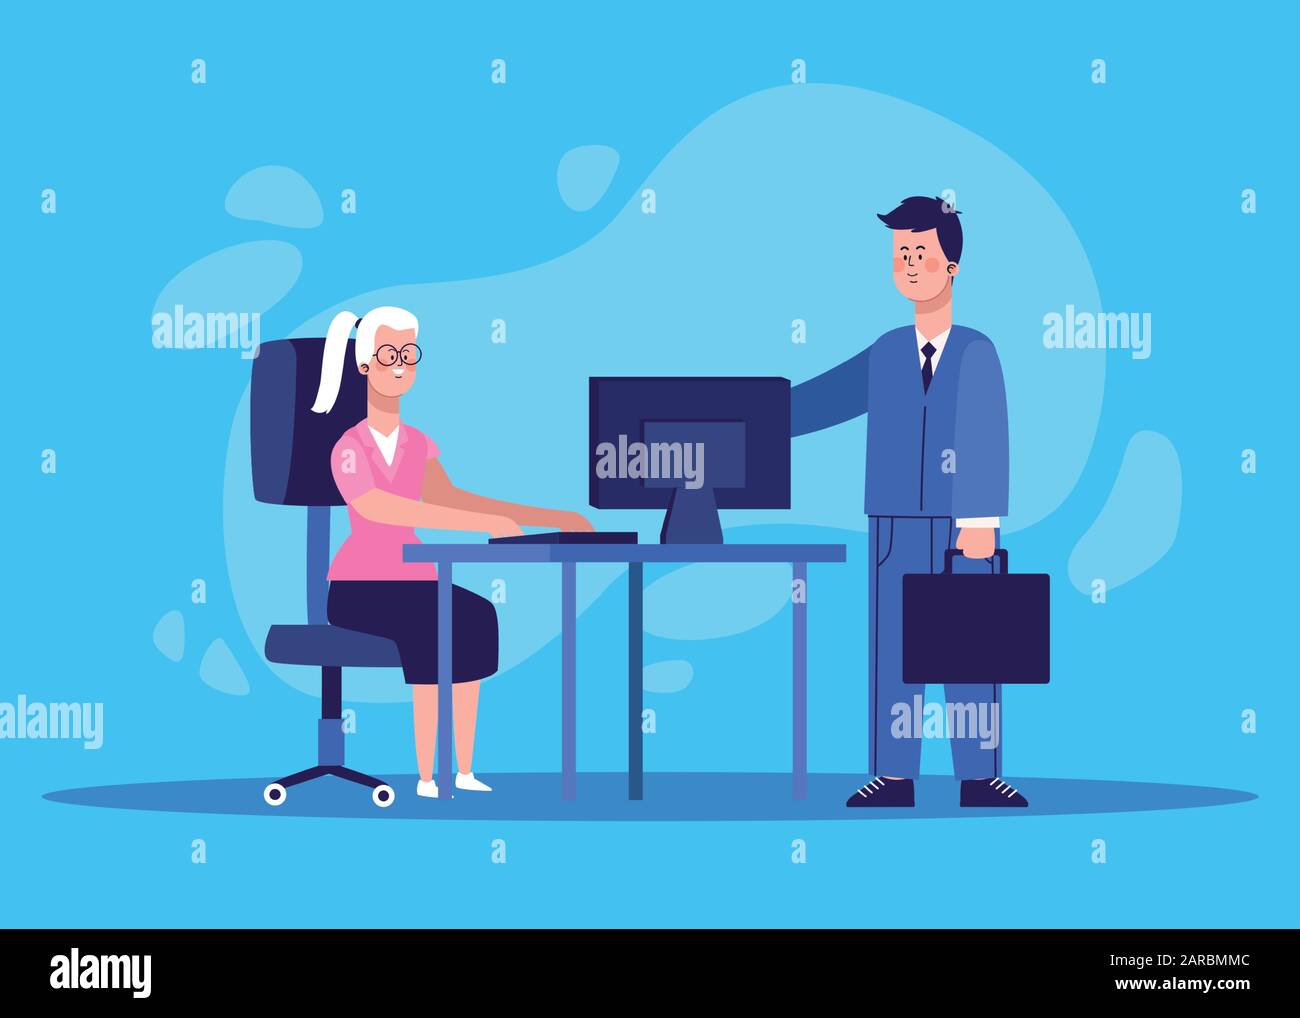 Cartoon Businessman And Woman Sitting On Office Desk With Computer